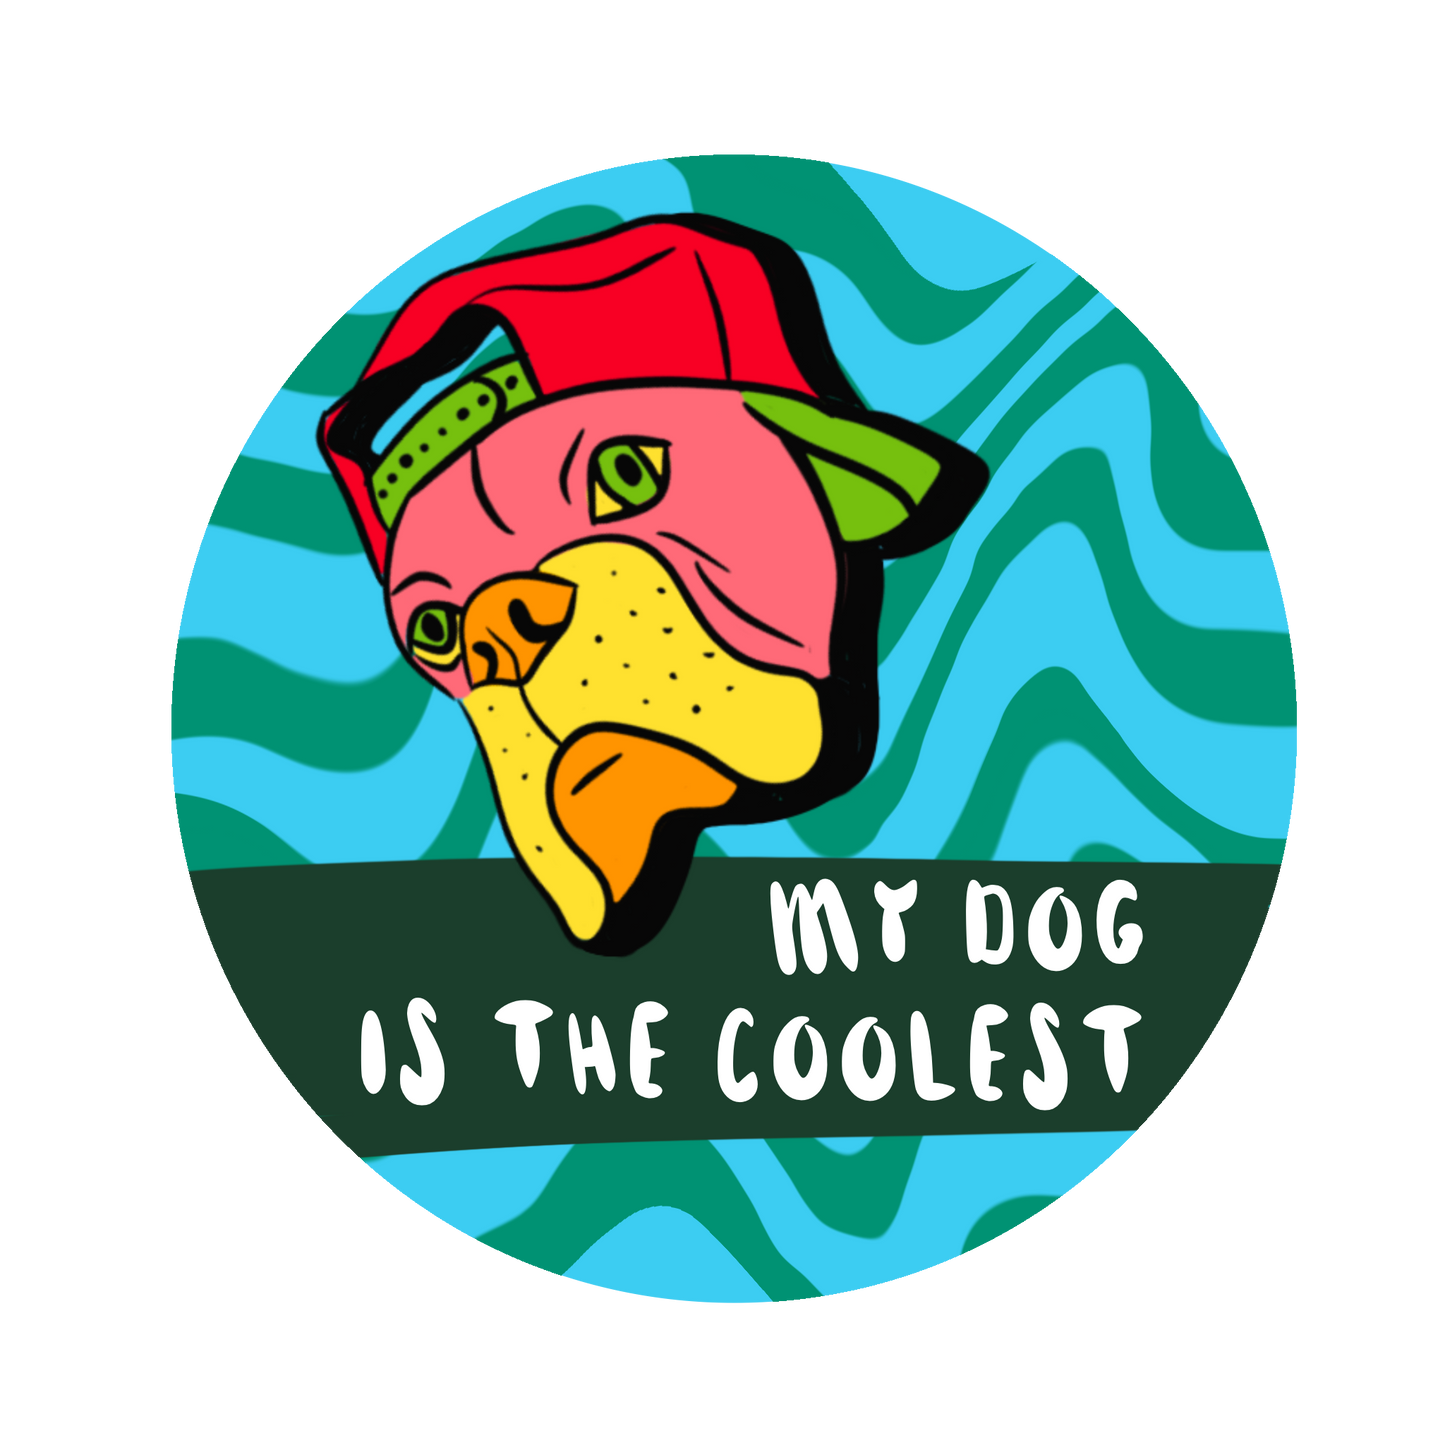 "my dog is the coolest" sticker